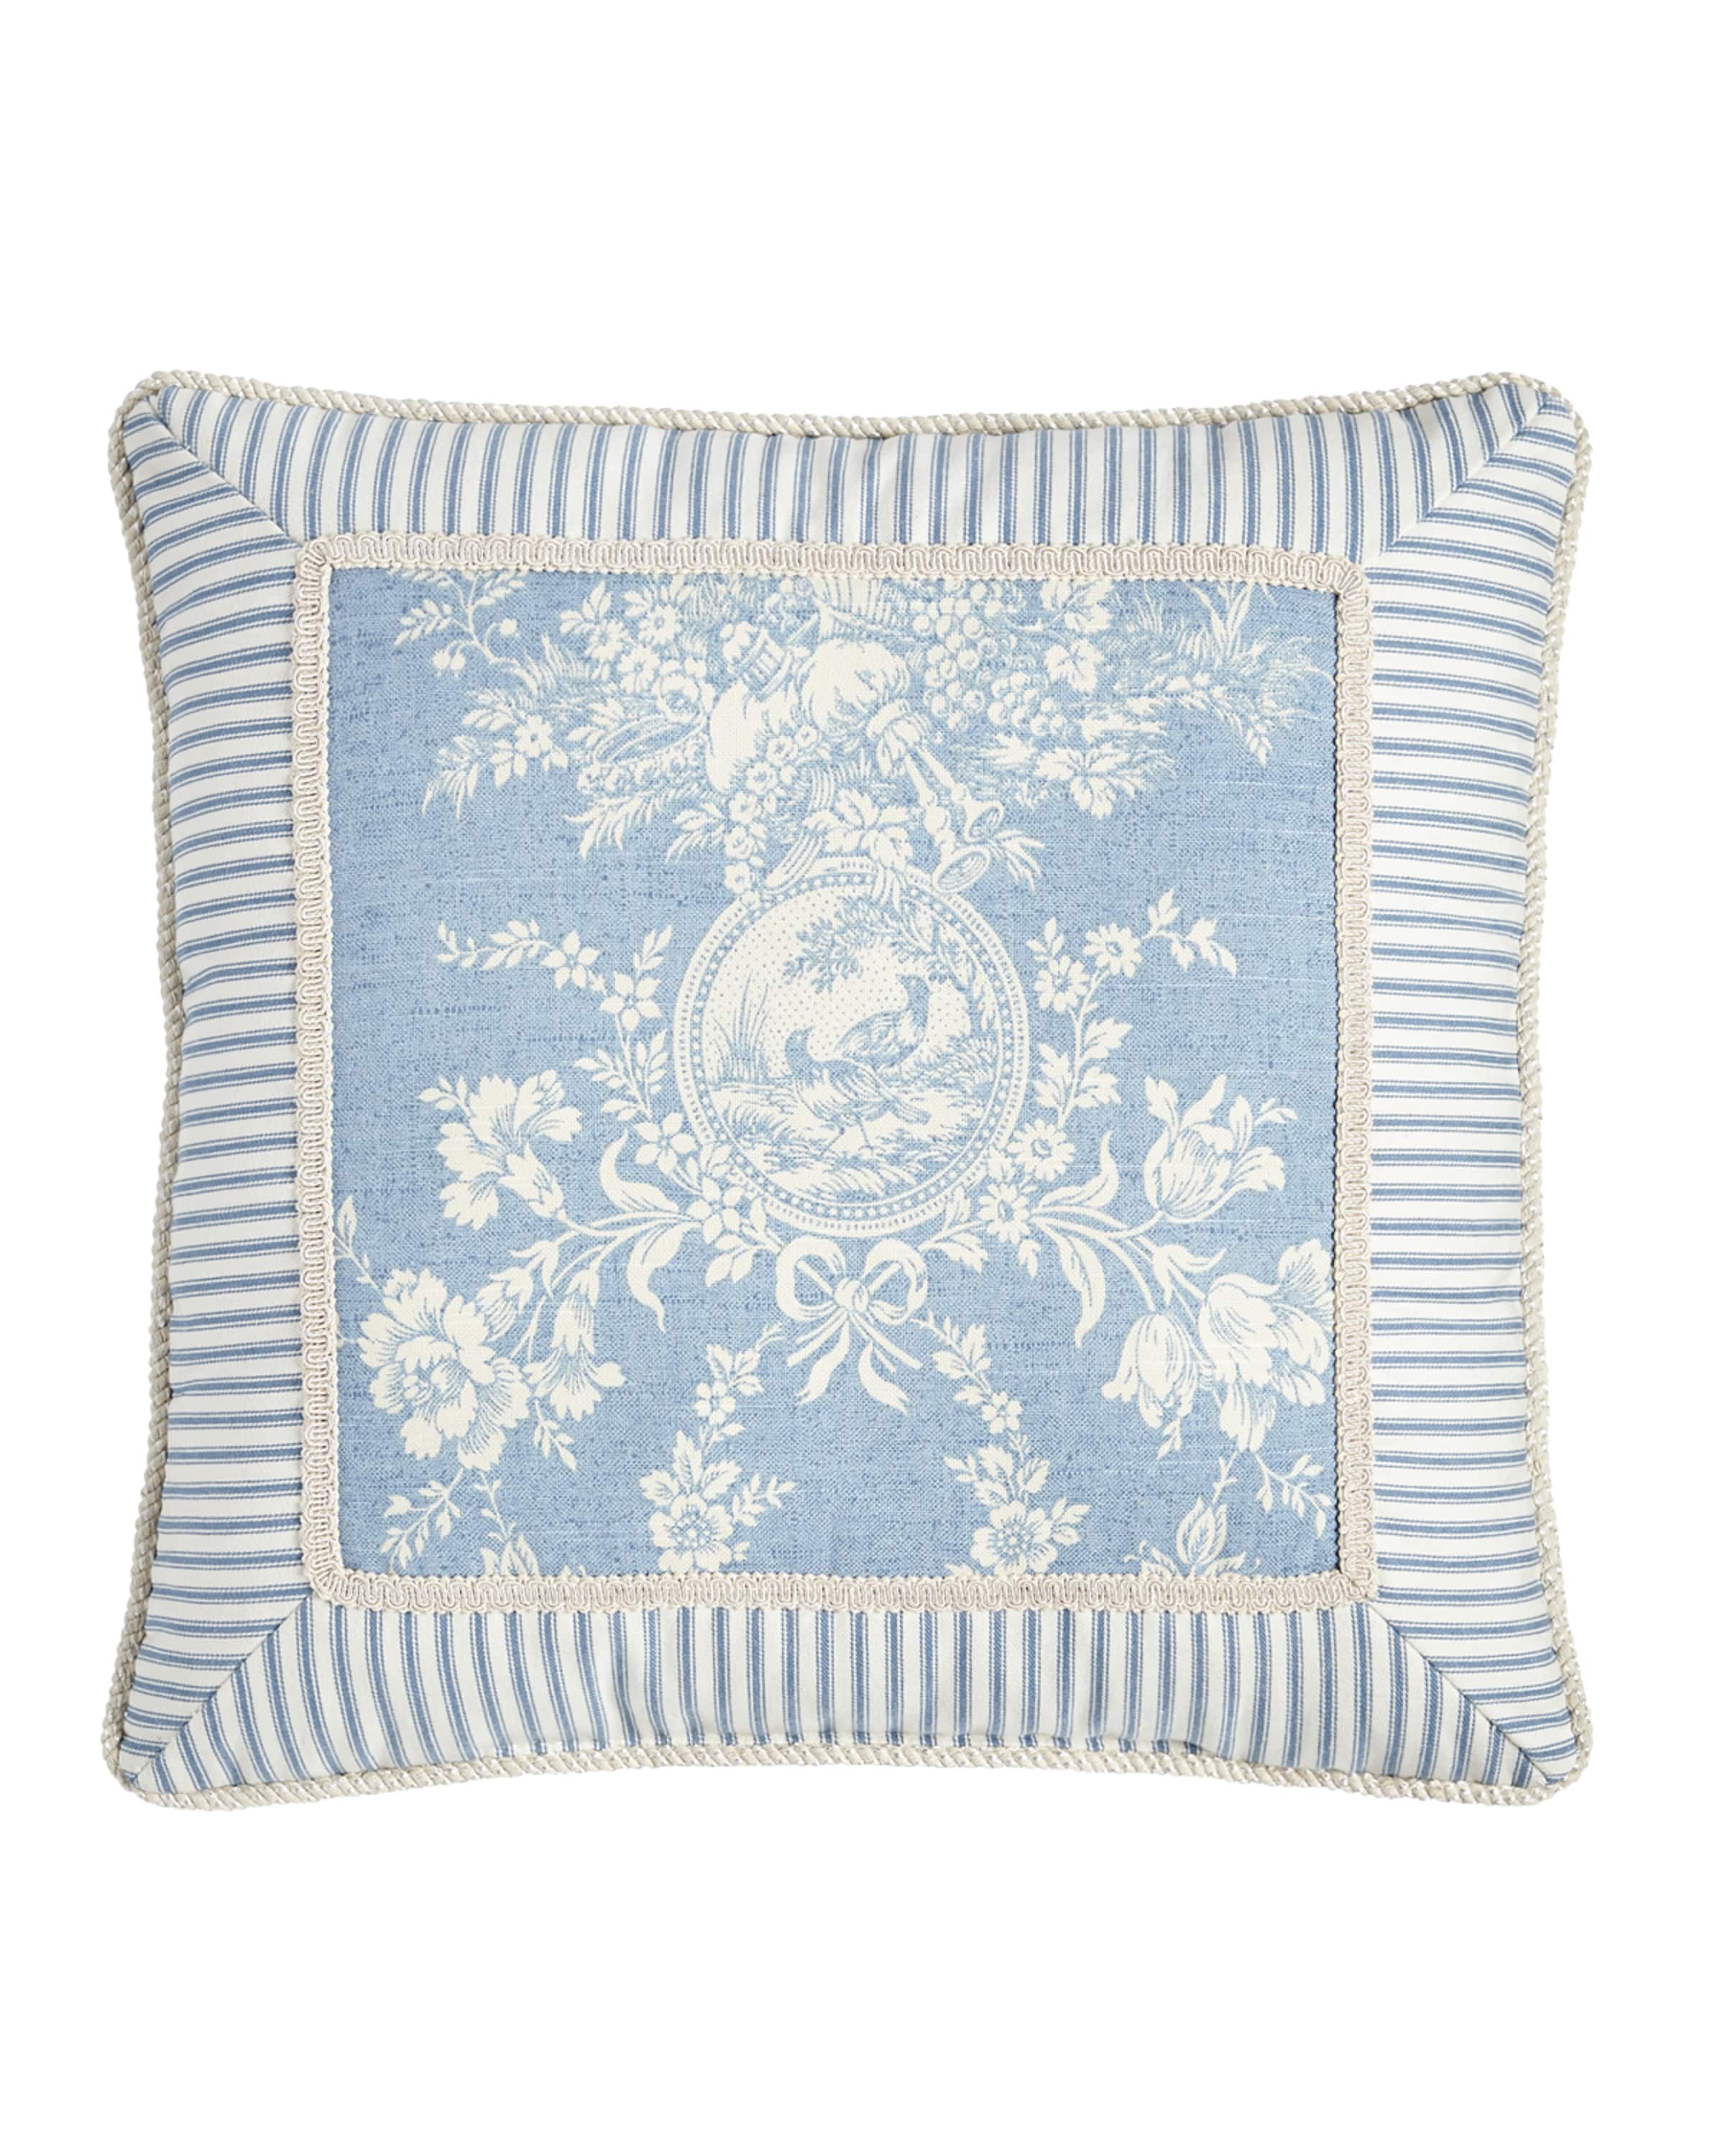 Sherry Kline Home Framed Country Manor Toile-Print Pillow, 18"Sq.